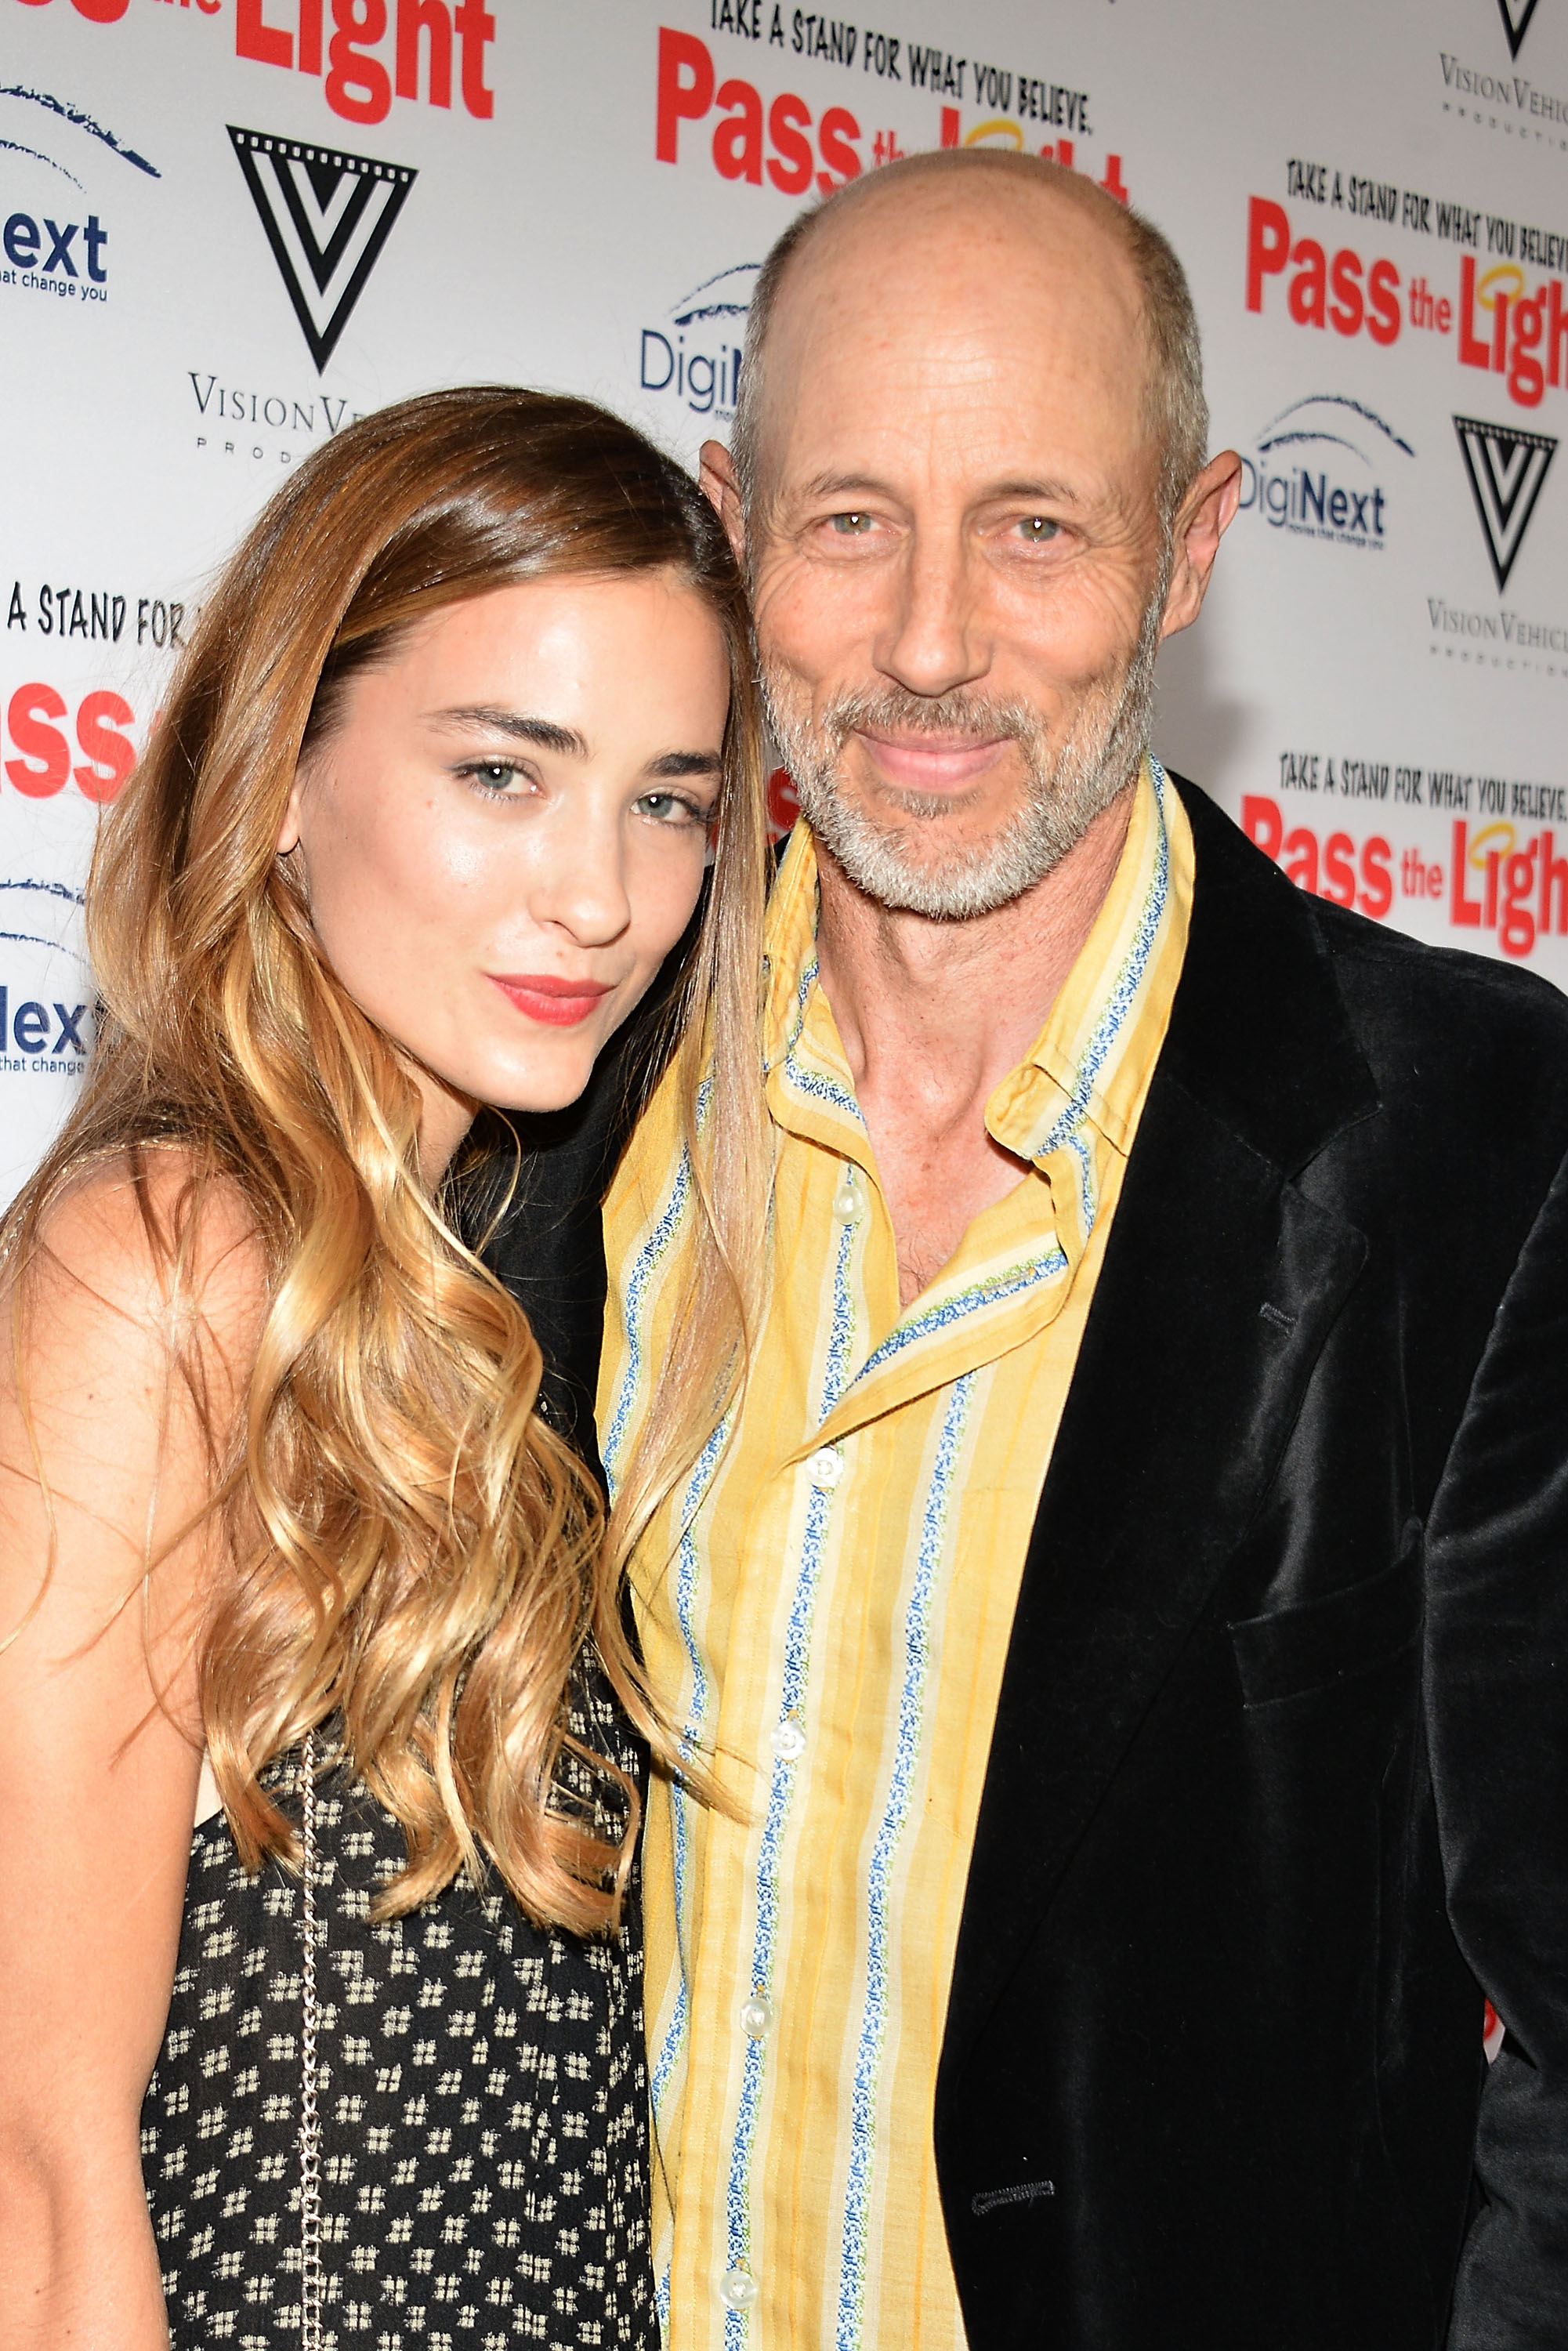 Rose McConnell and Jon Gries at the Hollywood premiere of PASS THE LIGHT